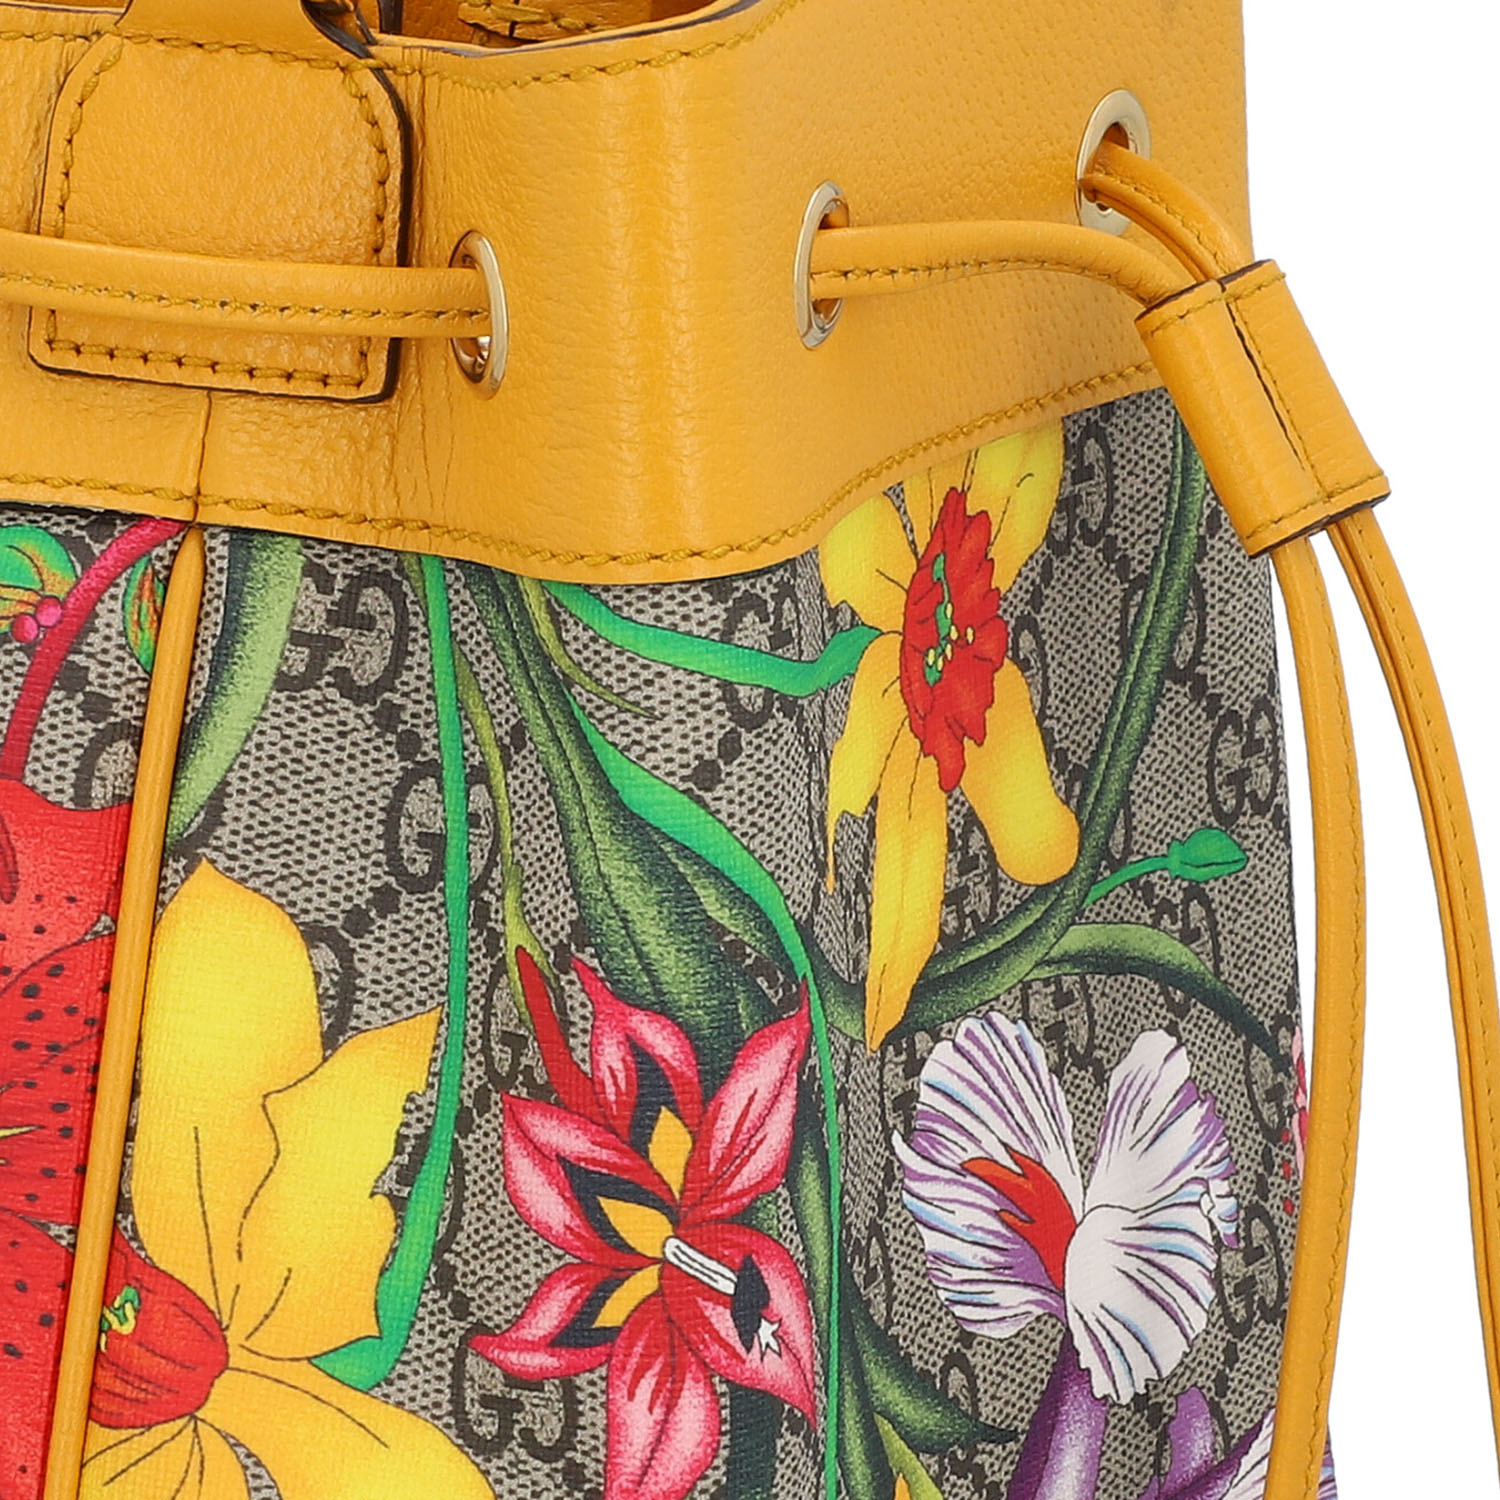 GUCCI Beuteltasche "OPHIDIA BUCKET BAG". - Image 8 of 8